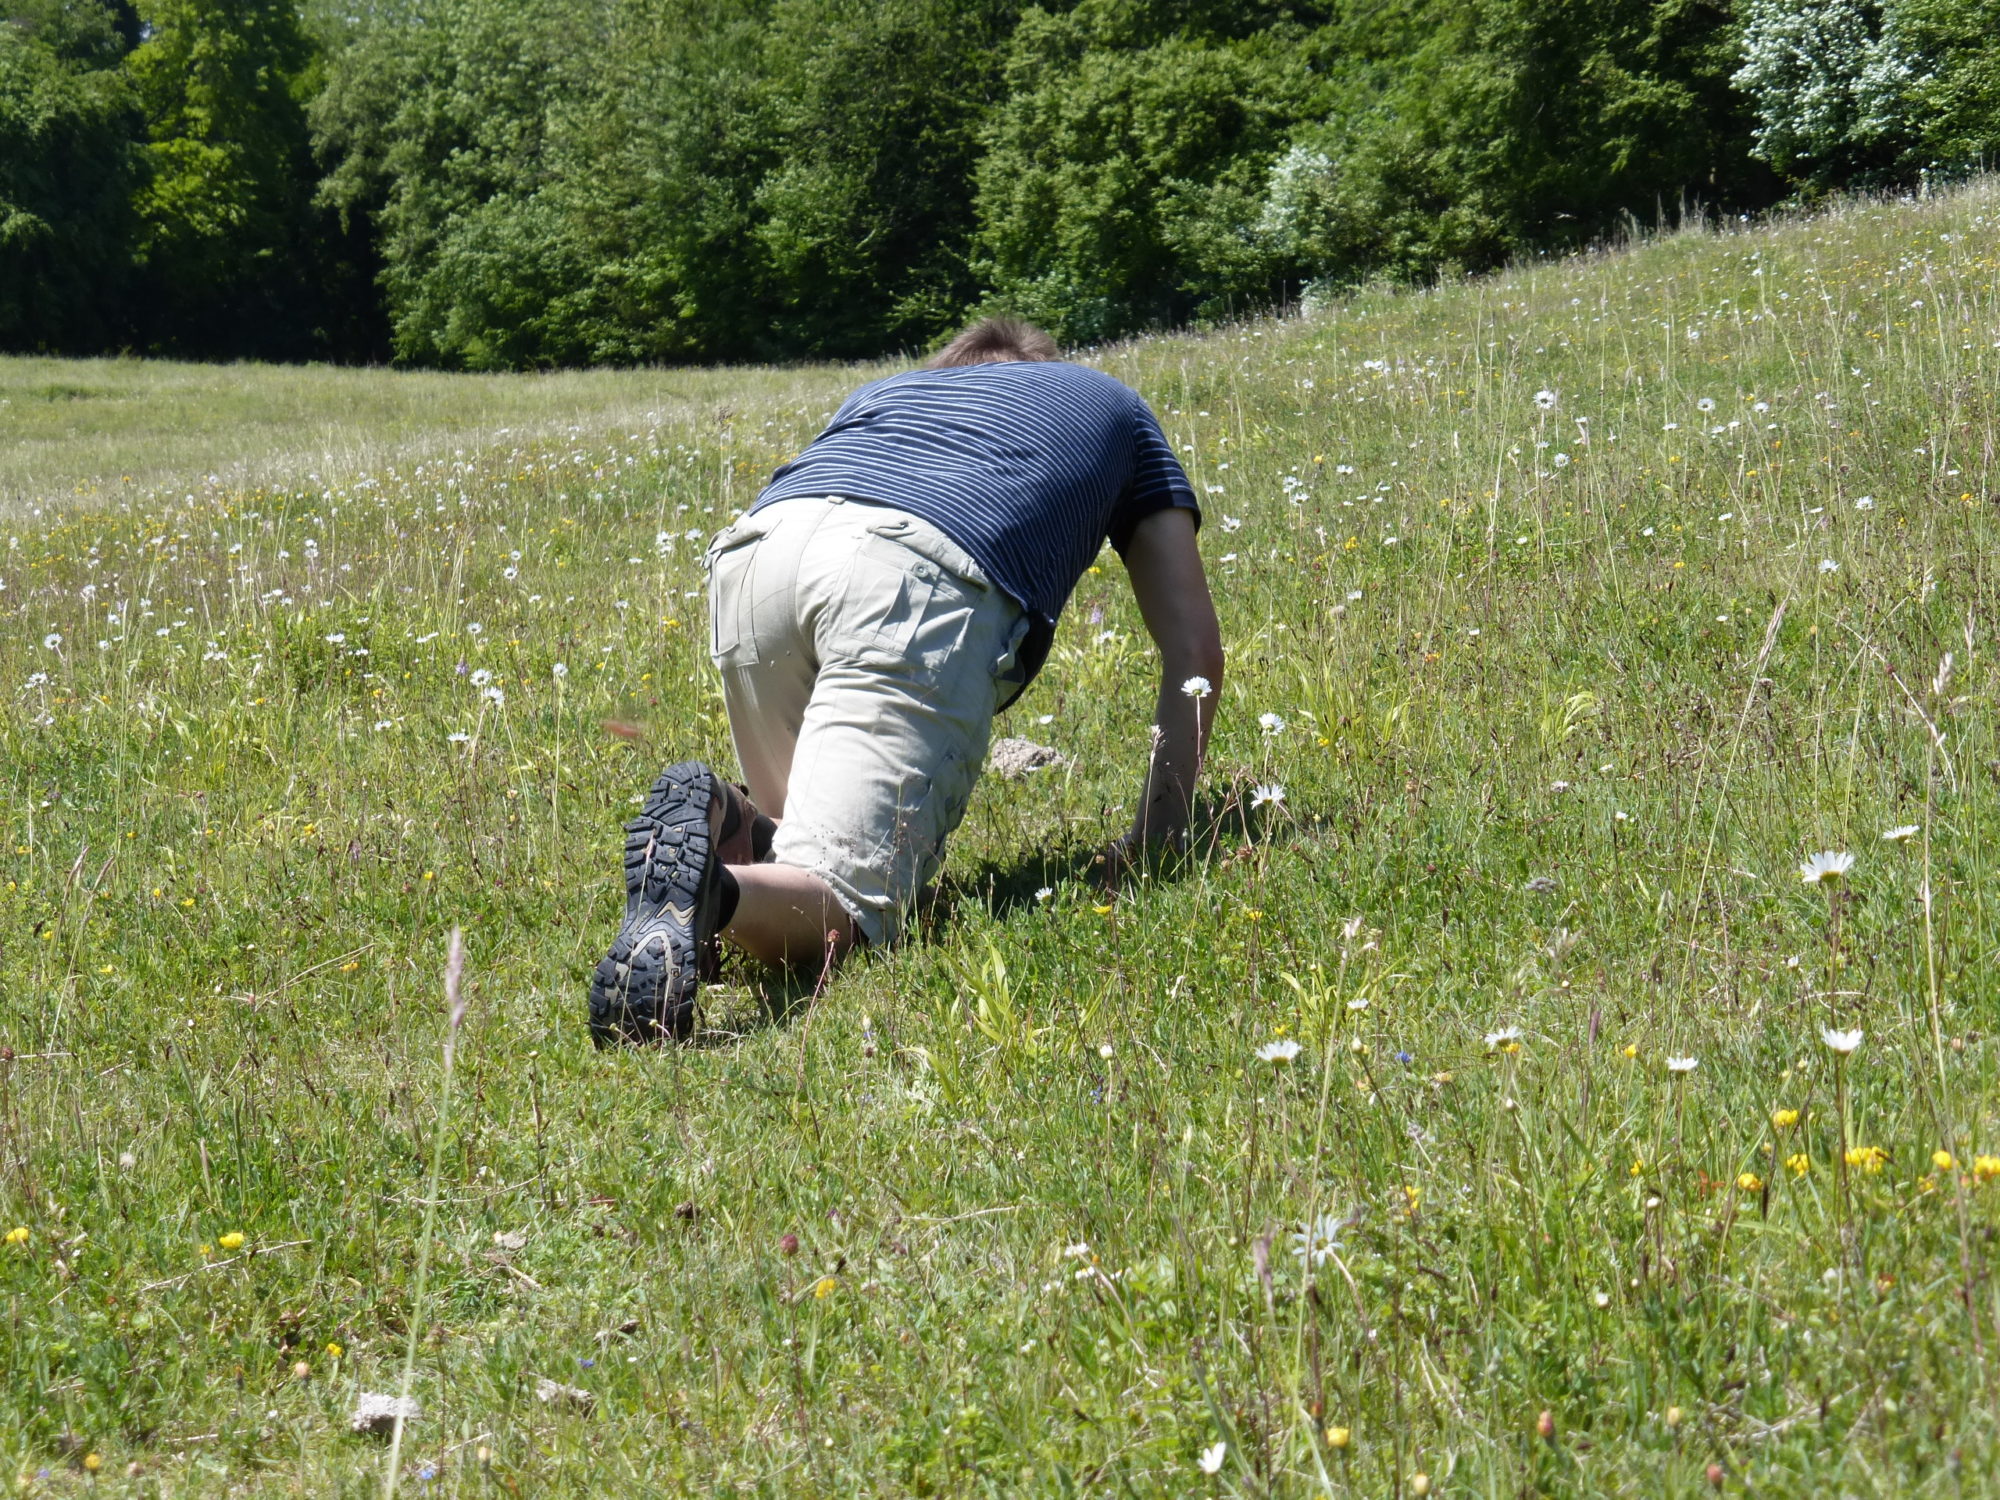 Sam Watson on his hands and knees looking at plants.